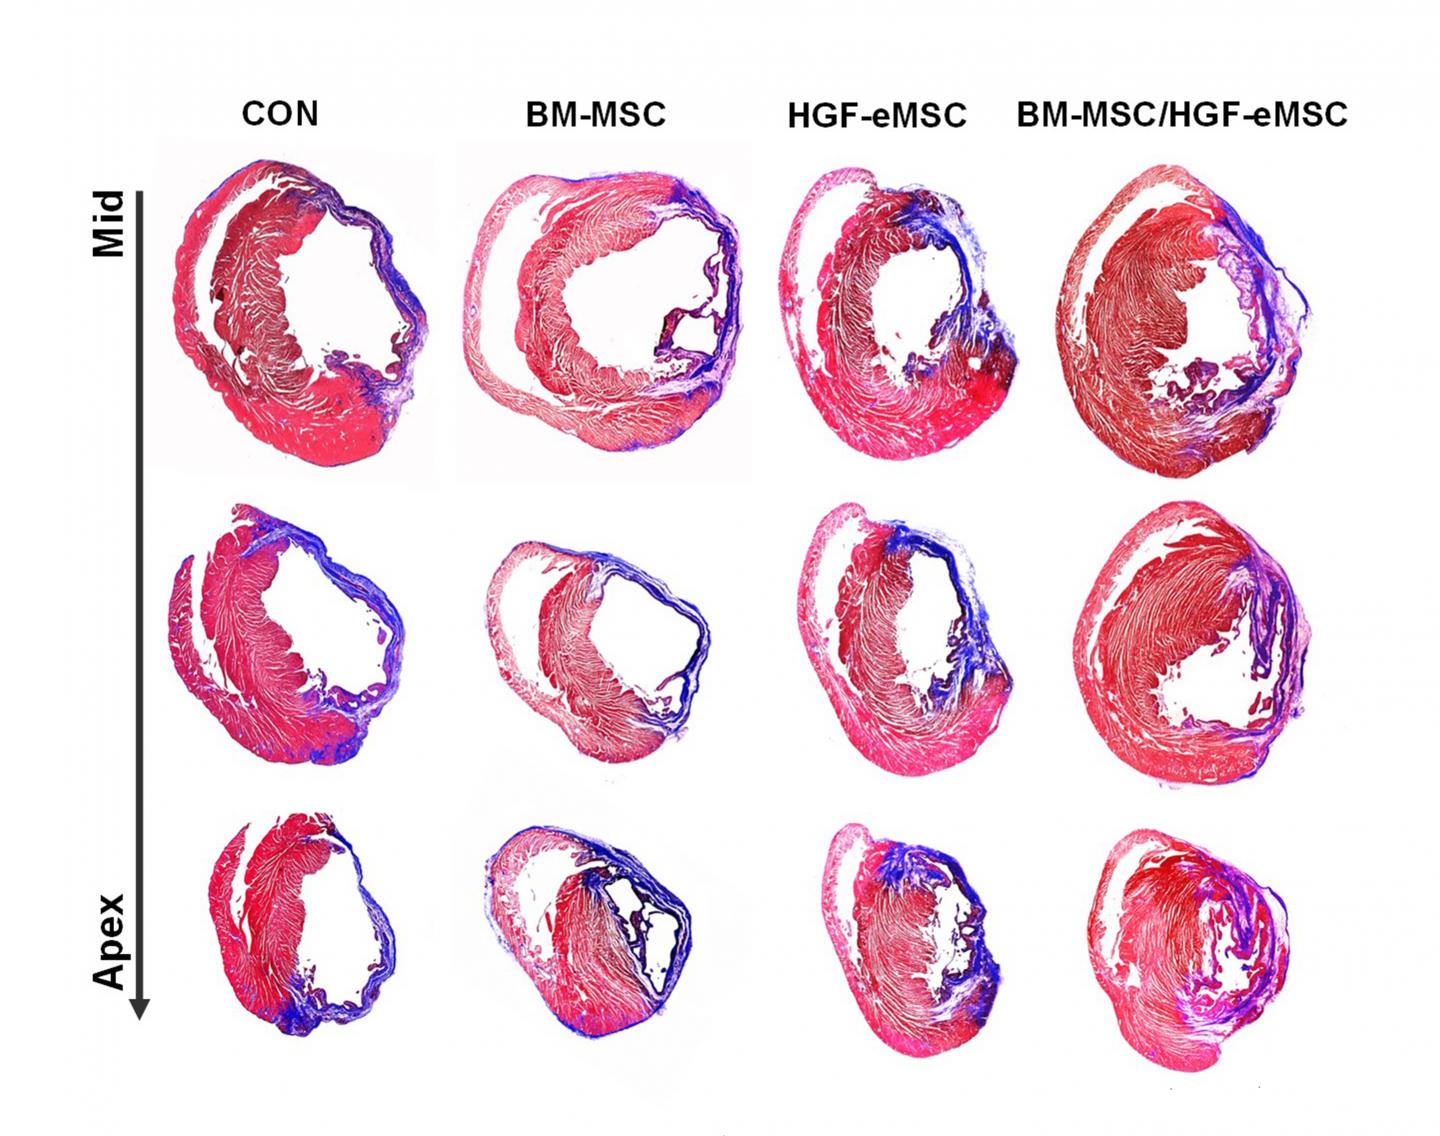 Comparison of Cardiac Tissues of Hearts Treated with Primed and Unprimed Cells